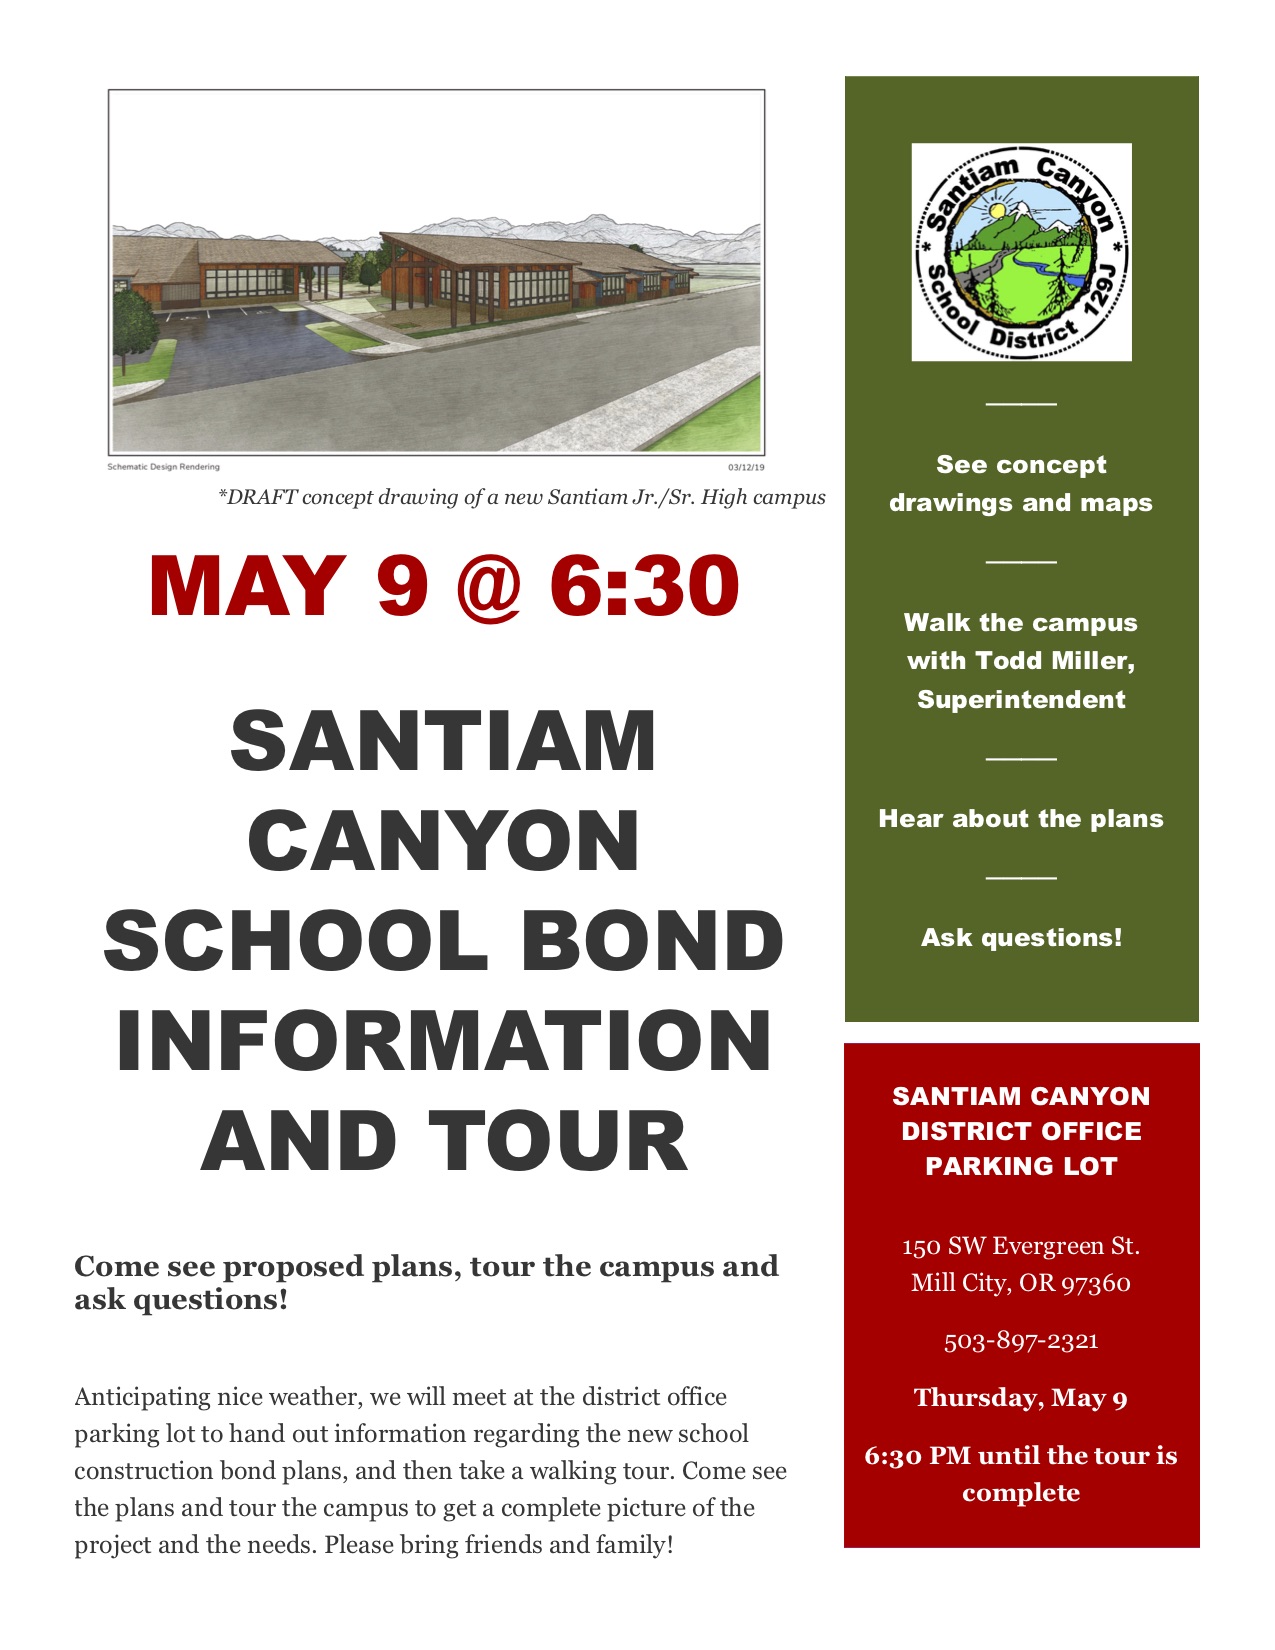 School Bond Information and Tour May 9, 2019